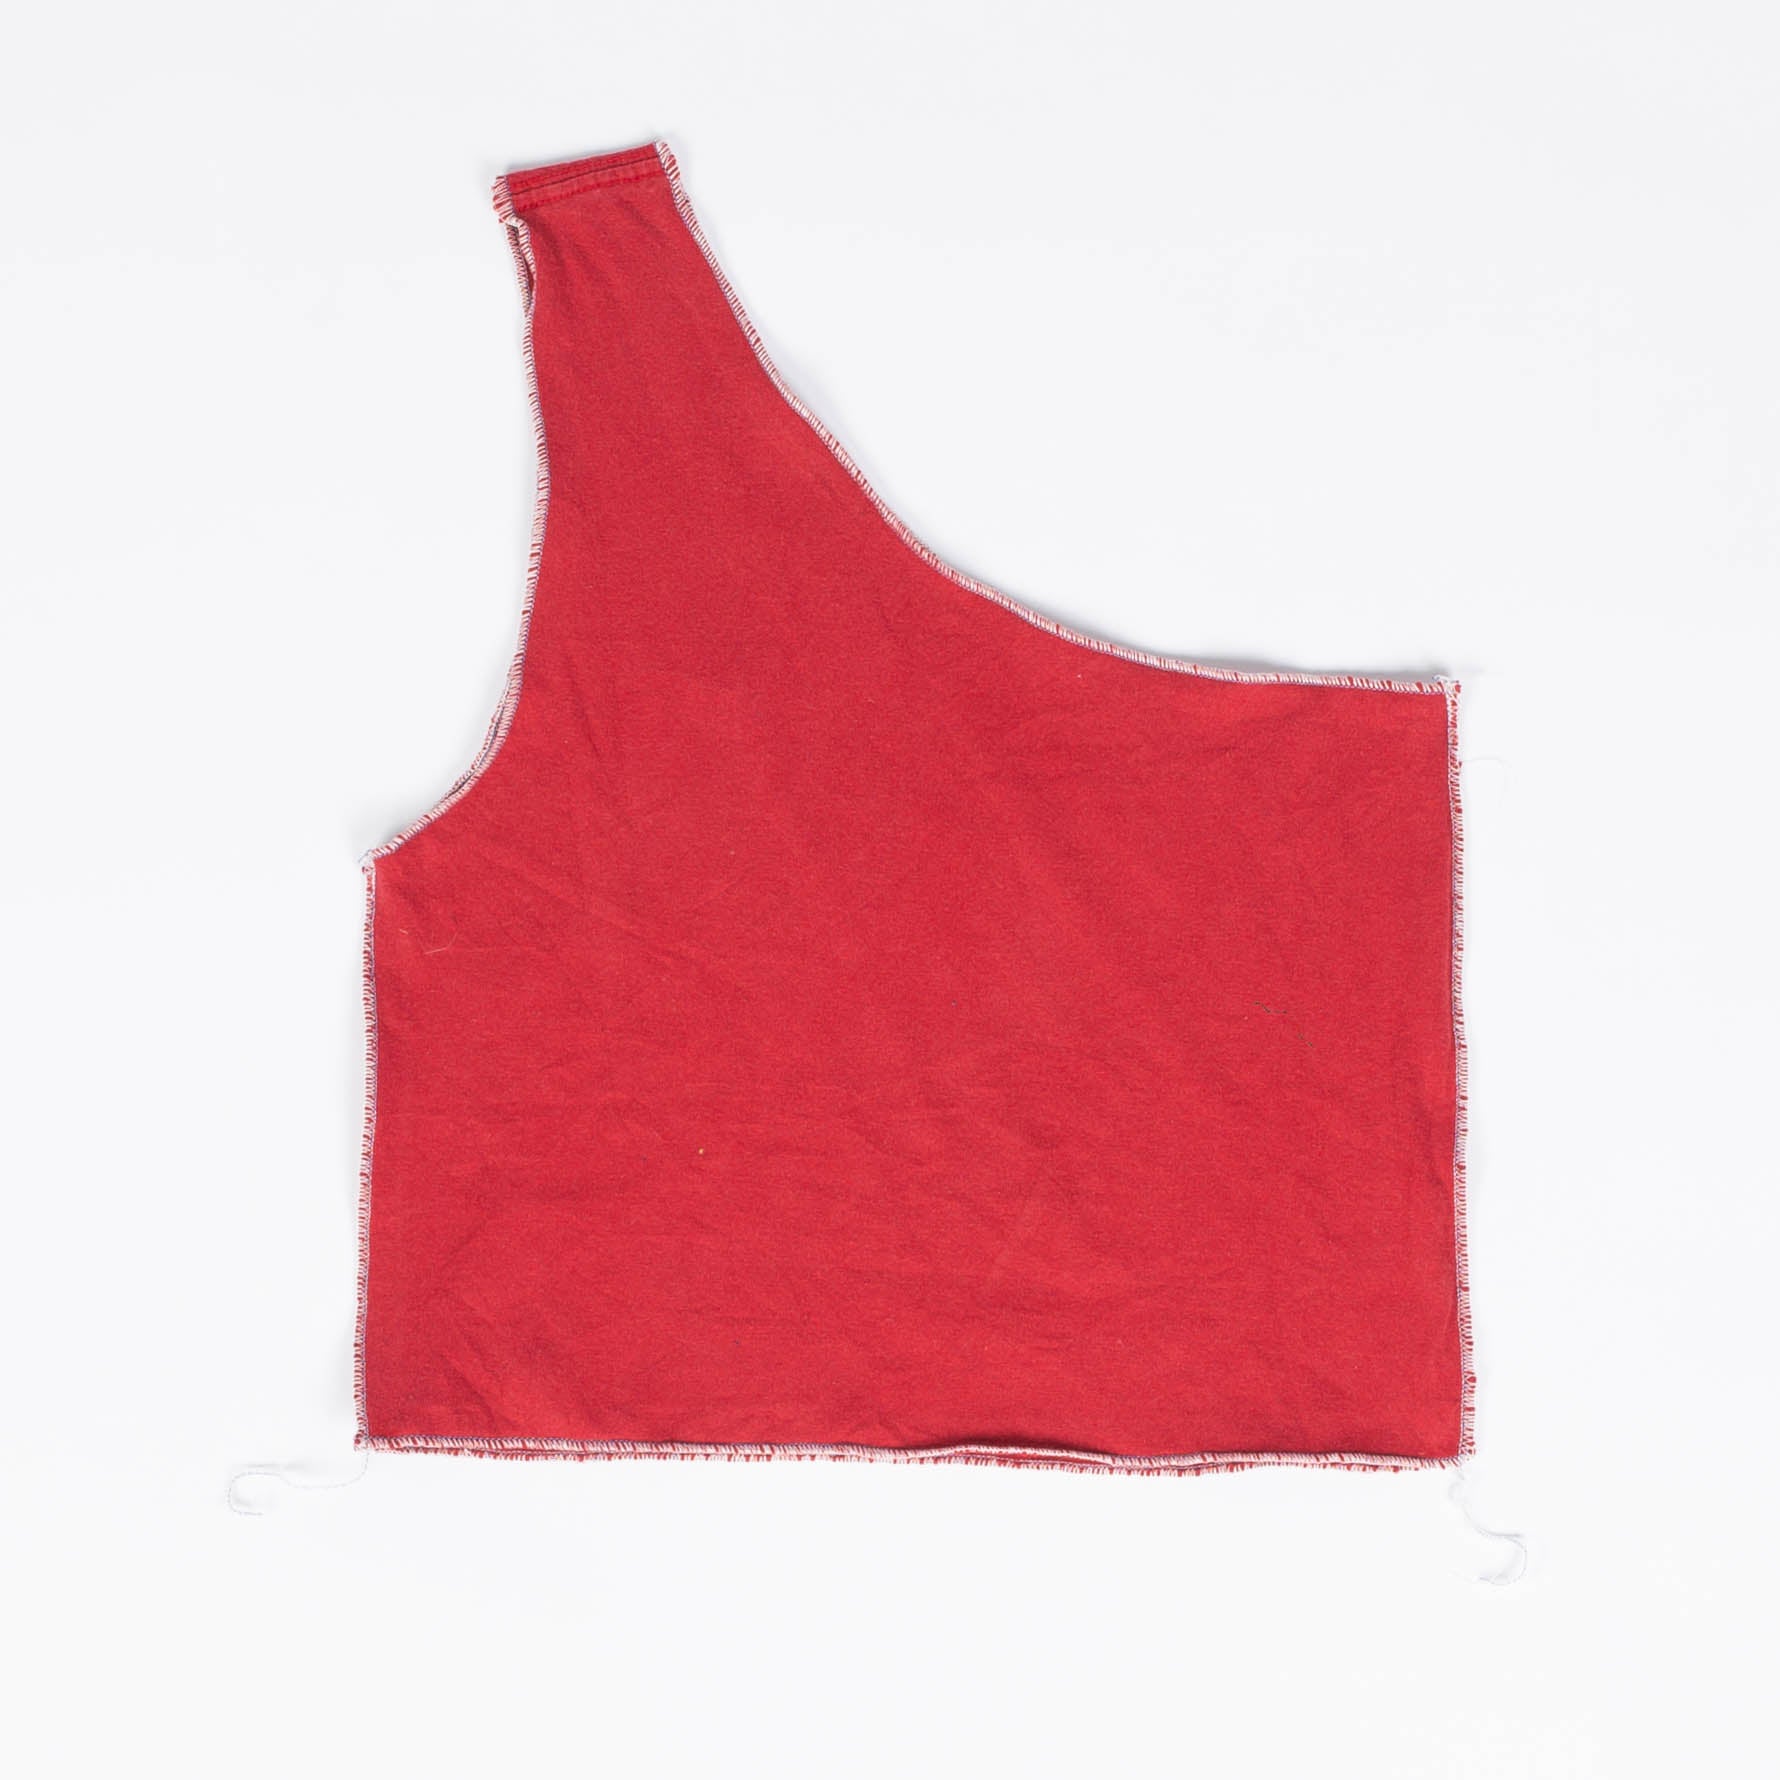 DCNSTRCTD Red Nike Crop Top Size M